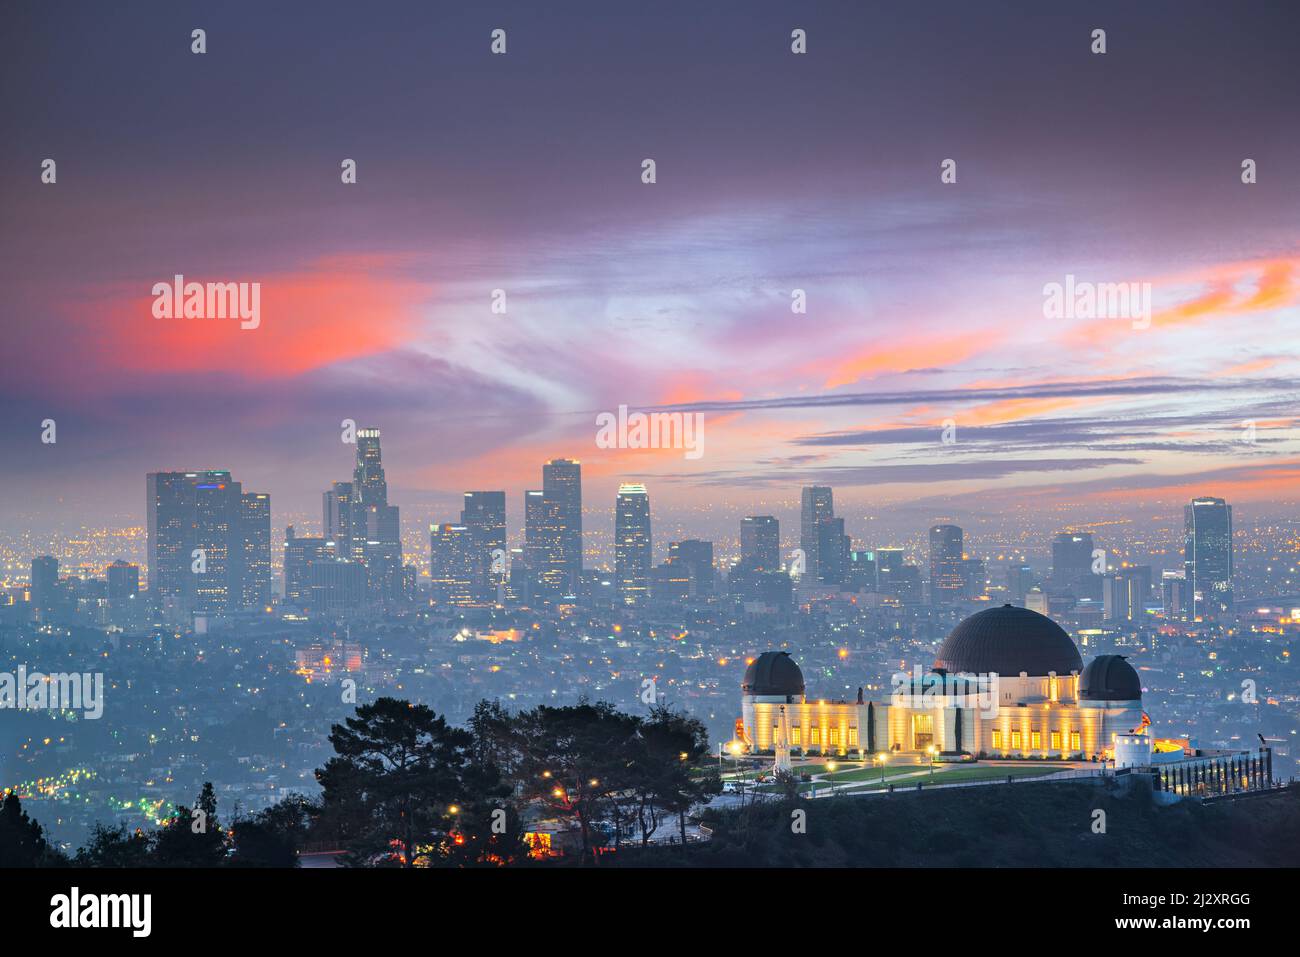 Los Angeles, California, USA downtown skyline from Griffith Park at twilight. Stock Photo